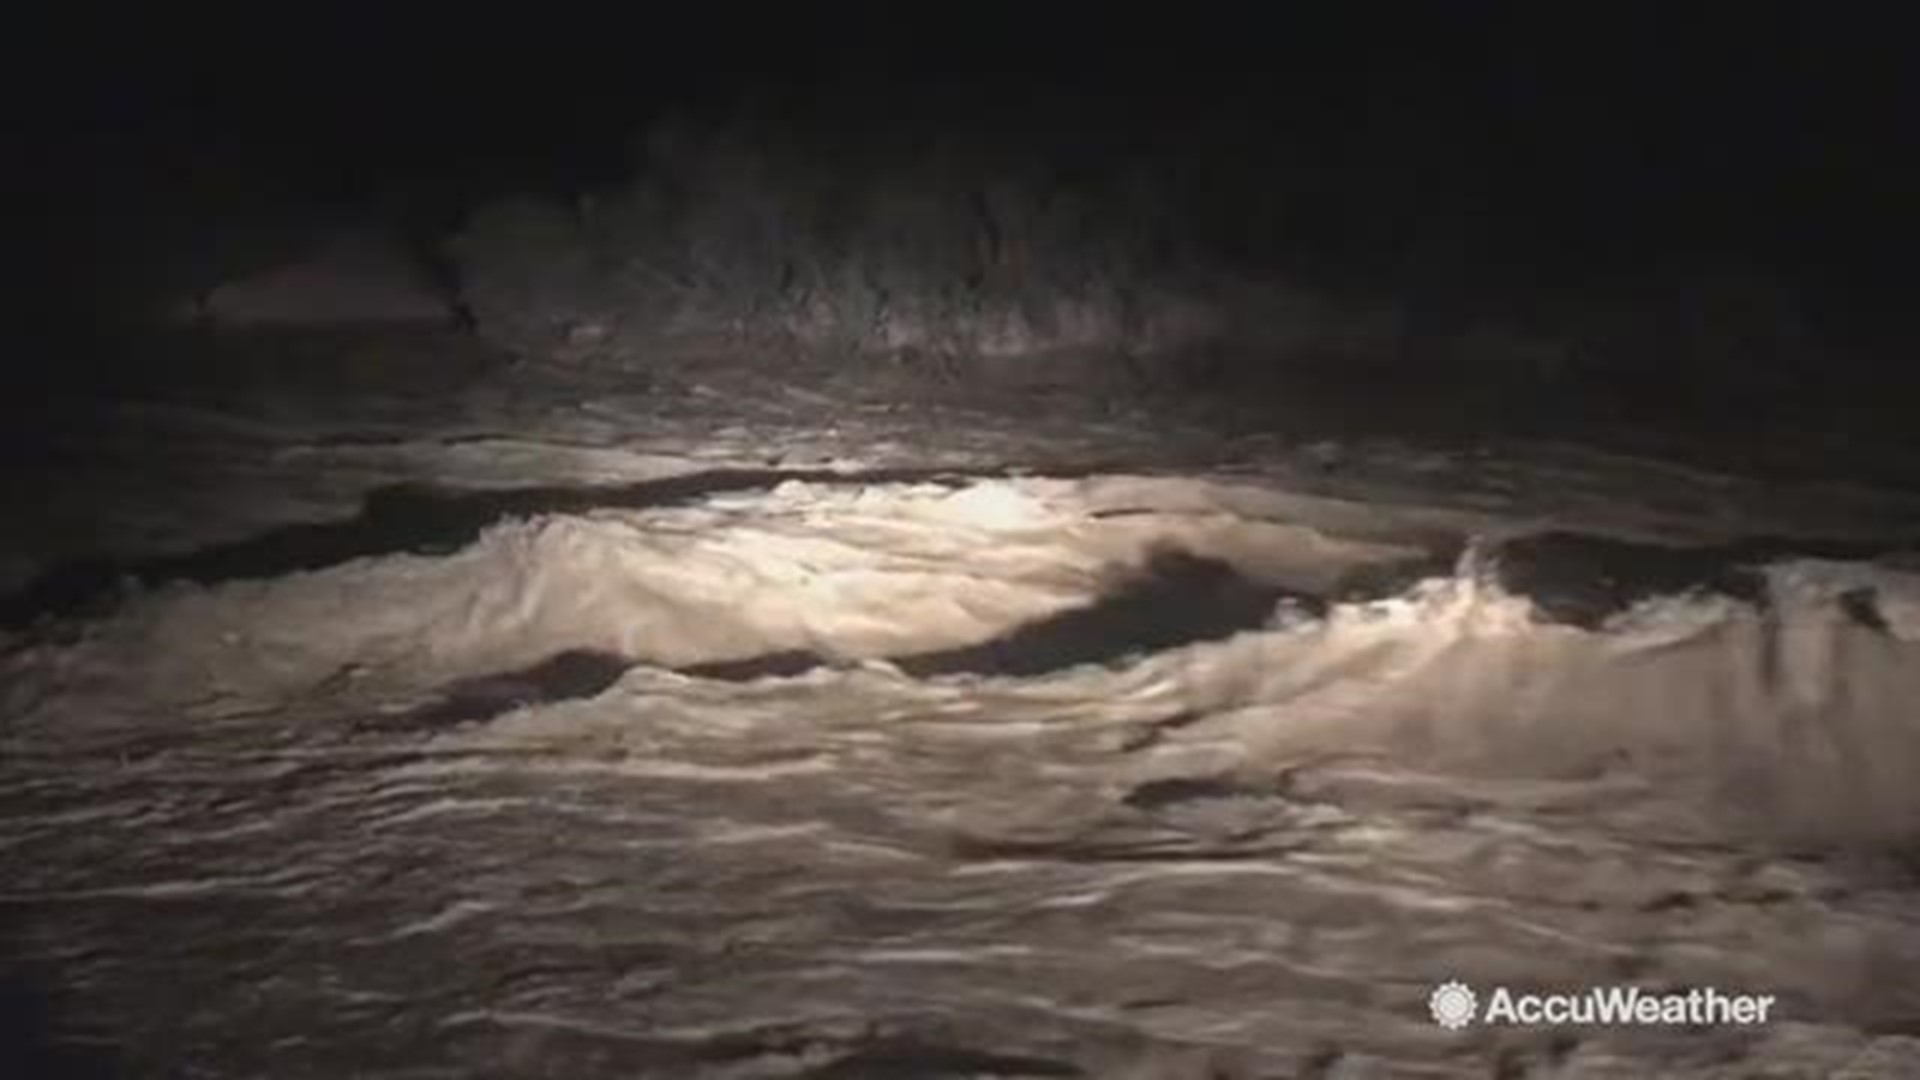 In the middle of monsoon season, Reed Timmer was in Utah to cover flash flooding produced by monsoon storms.  And he came across this fast-approaching flood raging across Last Chance Creek in Utah.